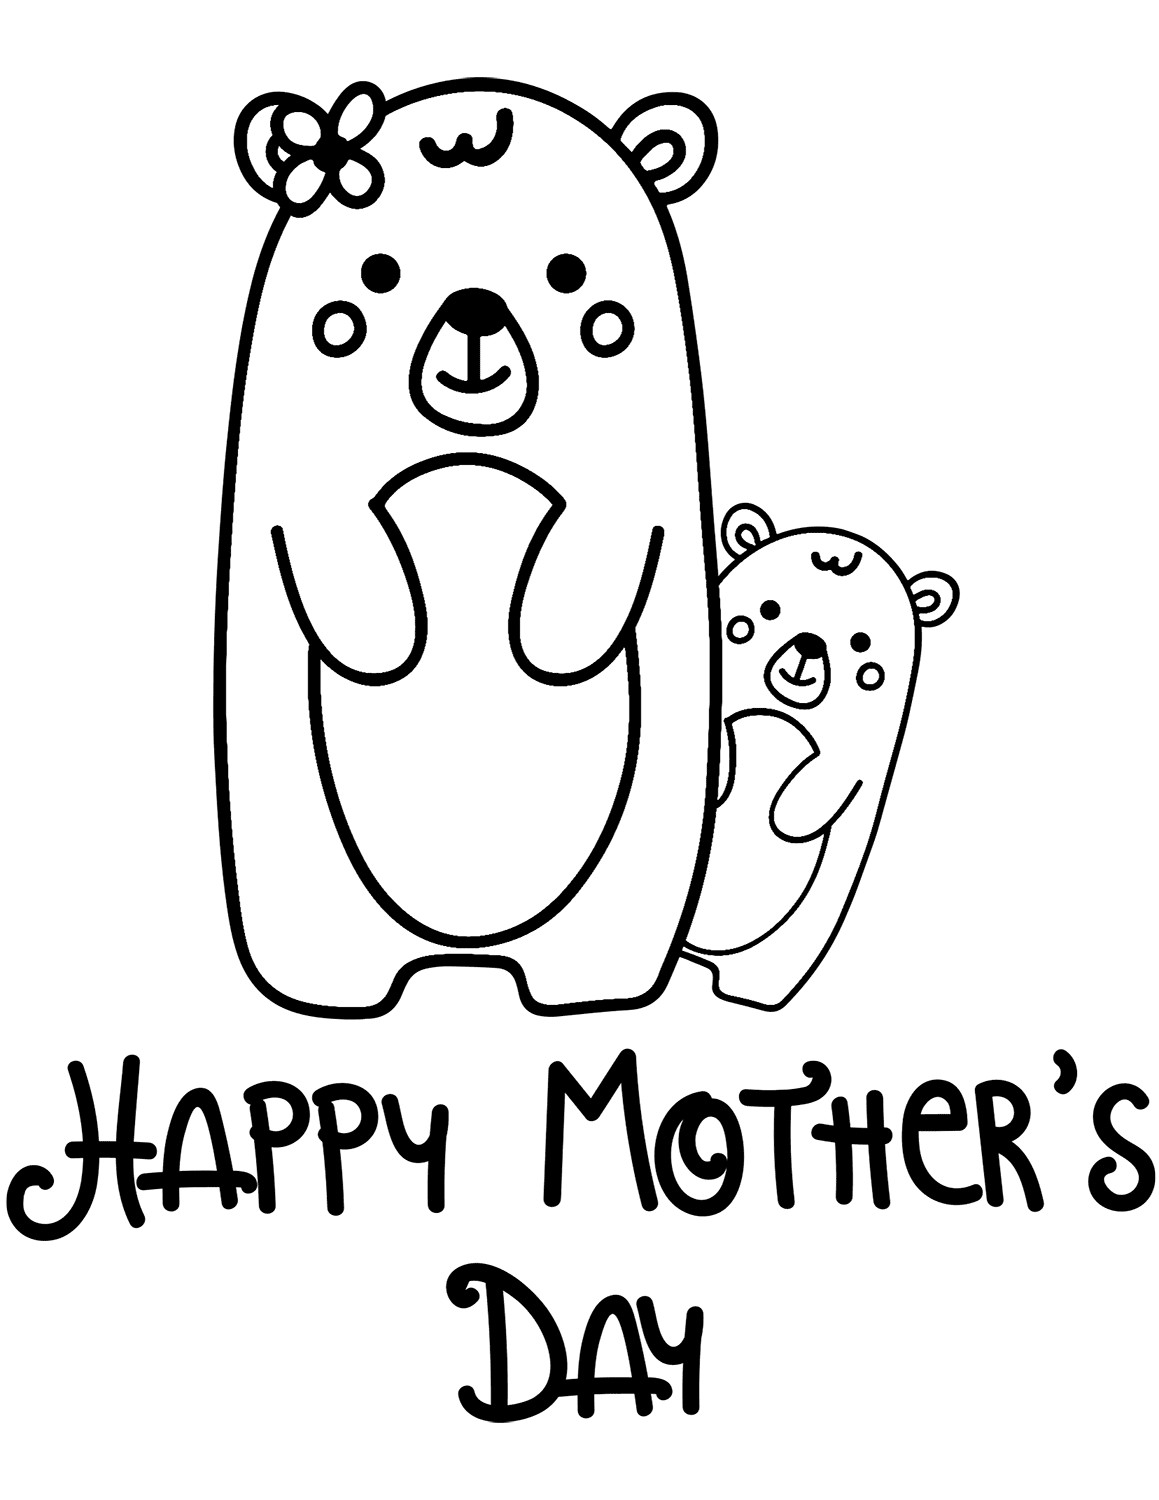 Boys Mothers Day Coloring Sheets
 30 Free Printable Mother’s Day Coloring Pages